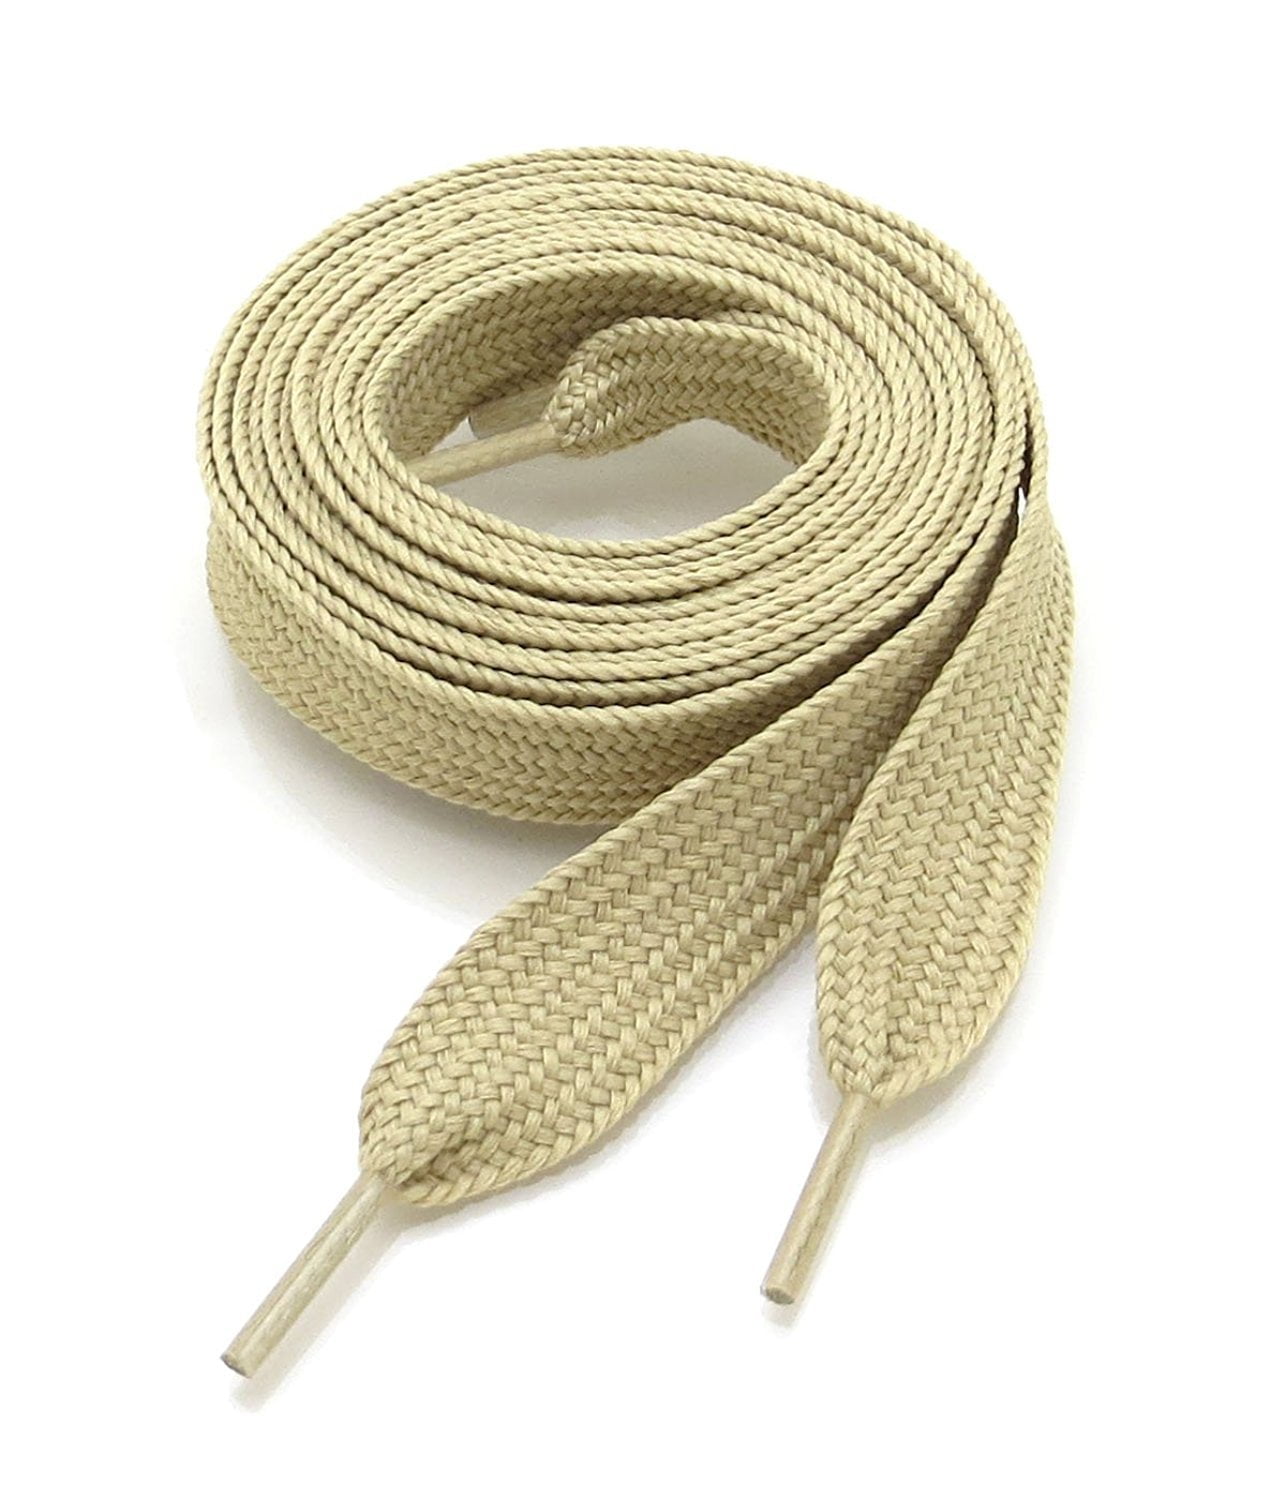 Fat Thick Shoe Laces 40-50'' For all Shoe Types Multiple Colors 